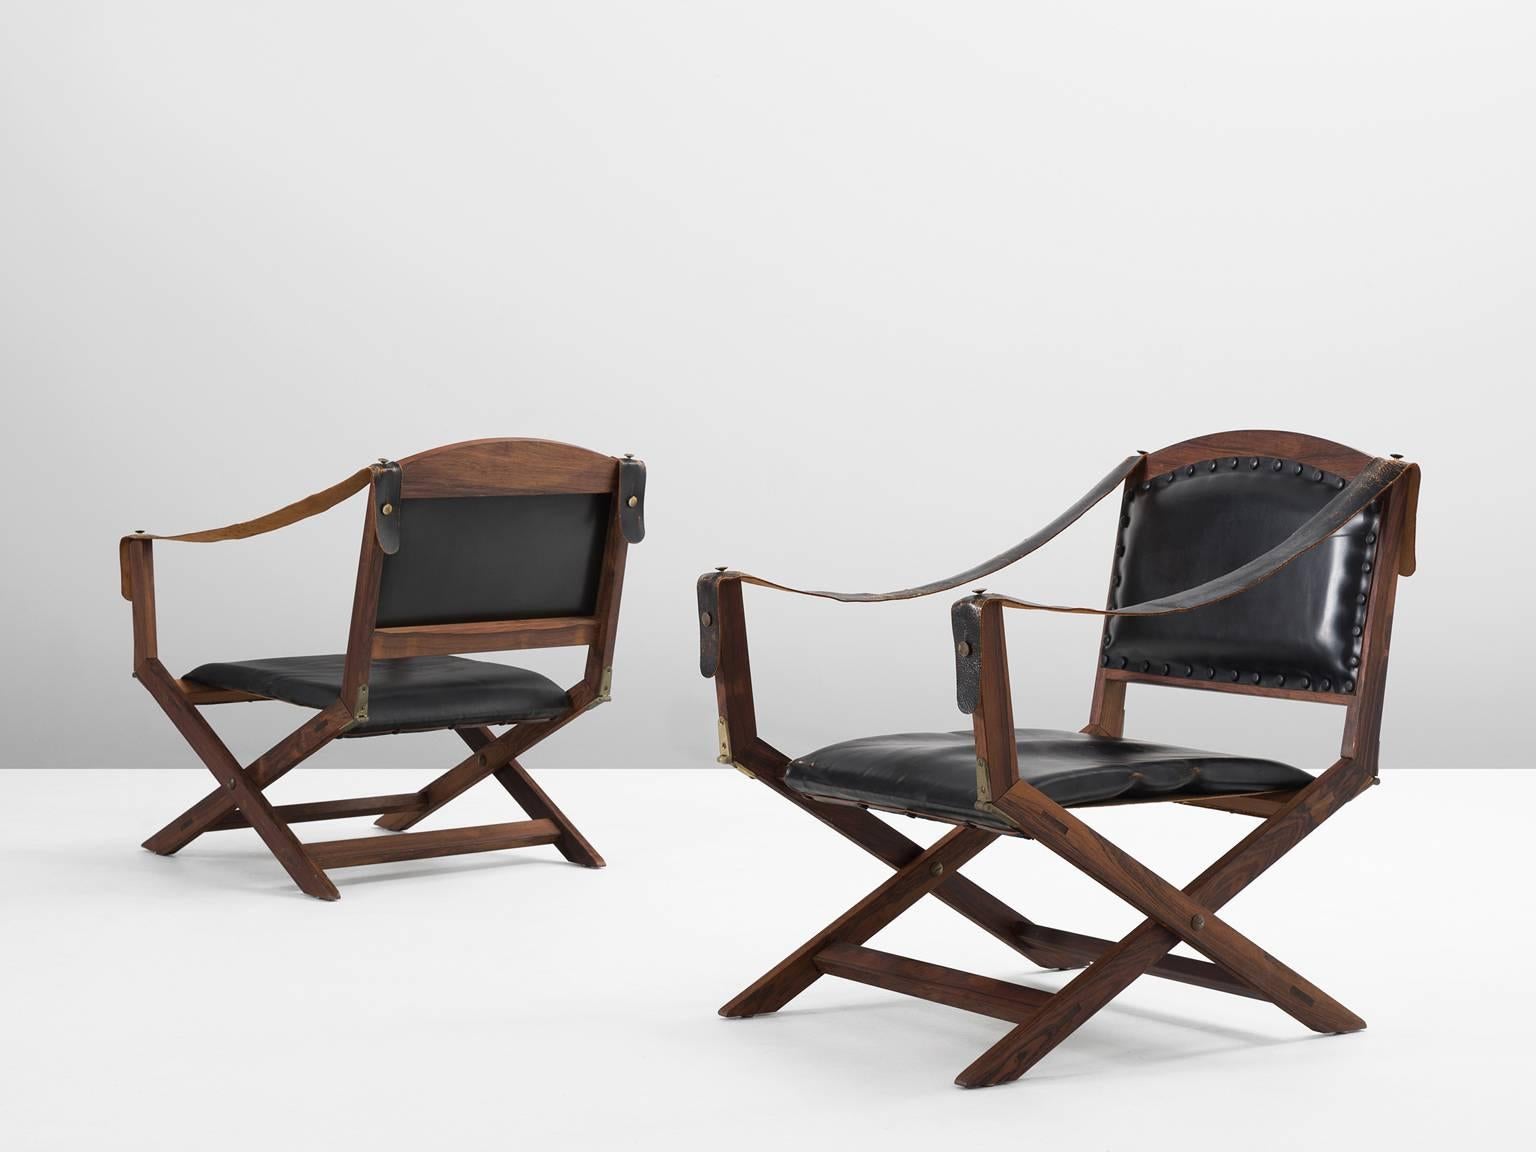 Set of two armchairs, in rosewood and leather, Scandinavia, 1940s. 

Two foldable safari chairs in Indian rosewood and black leather upholstery. These X-chairs have a classical appearance with several references to ancient furniture. These Campaign